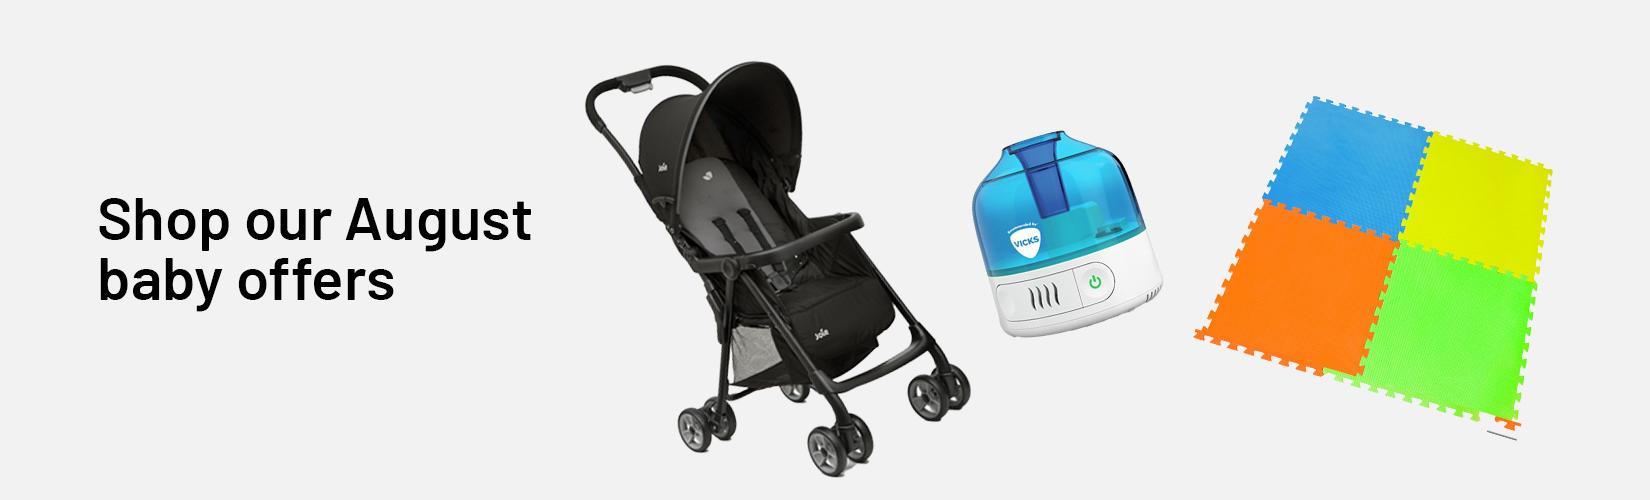 Shop our August baby offers.